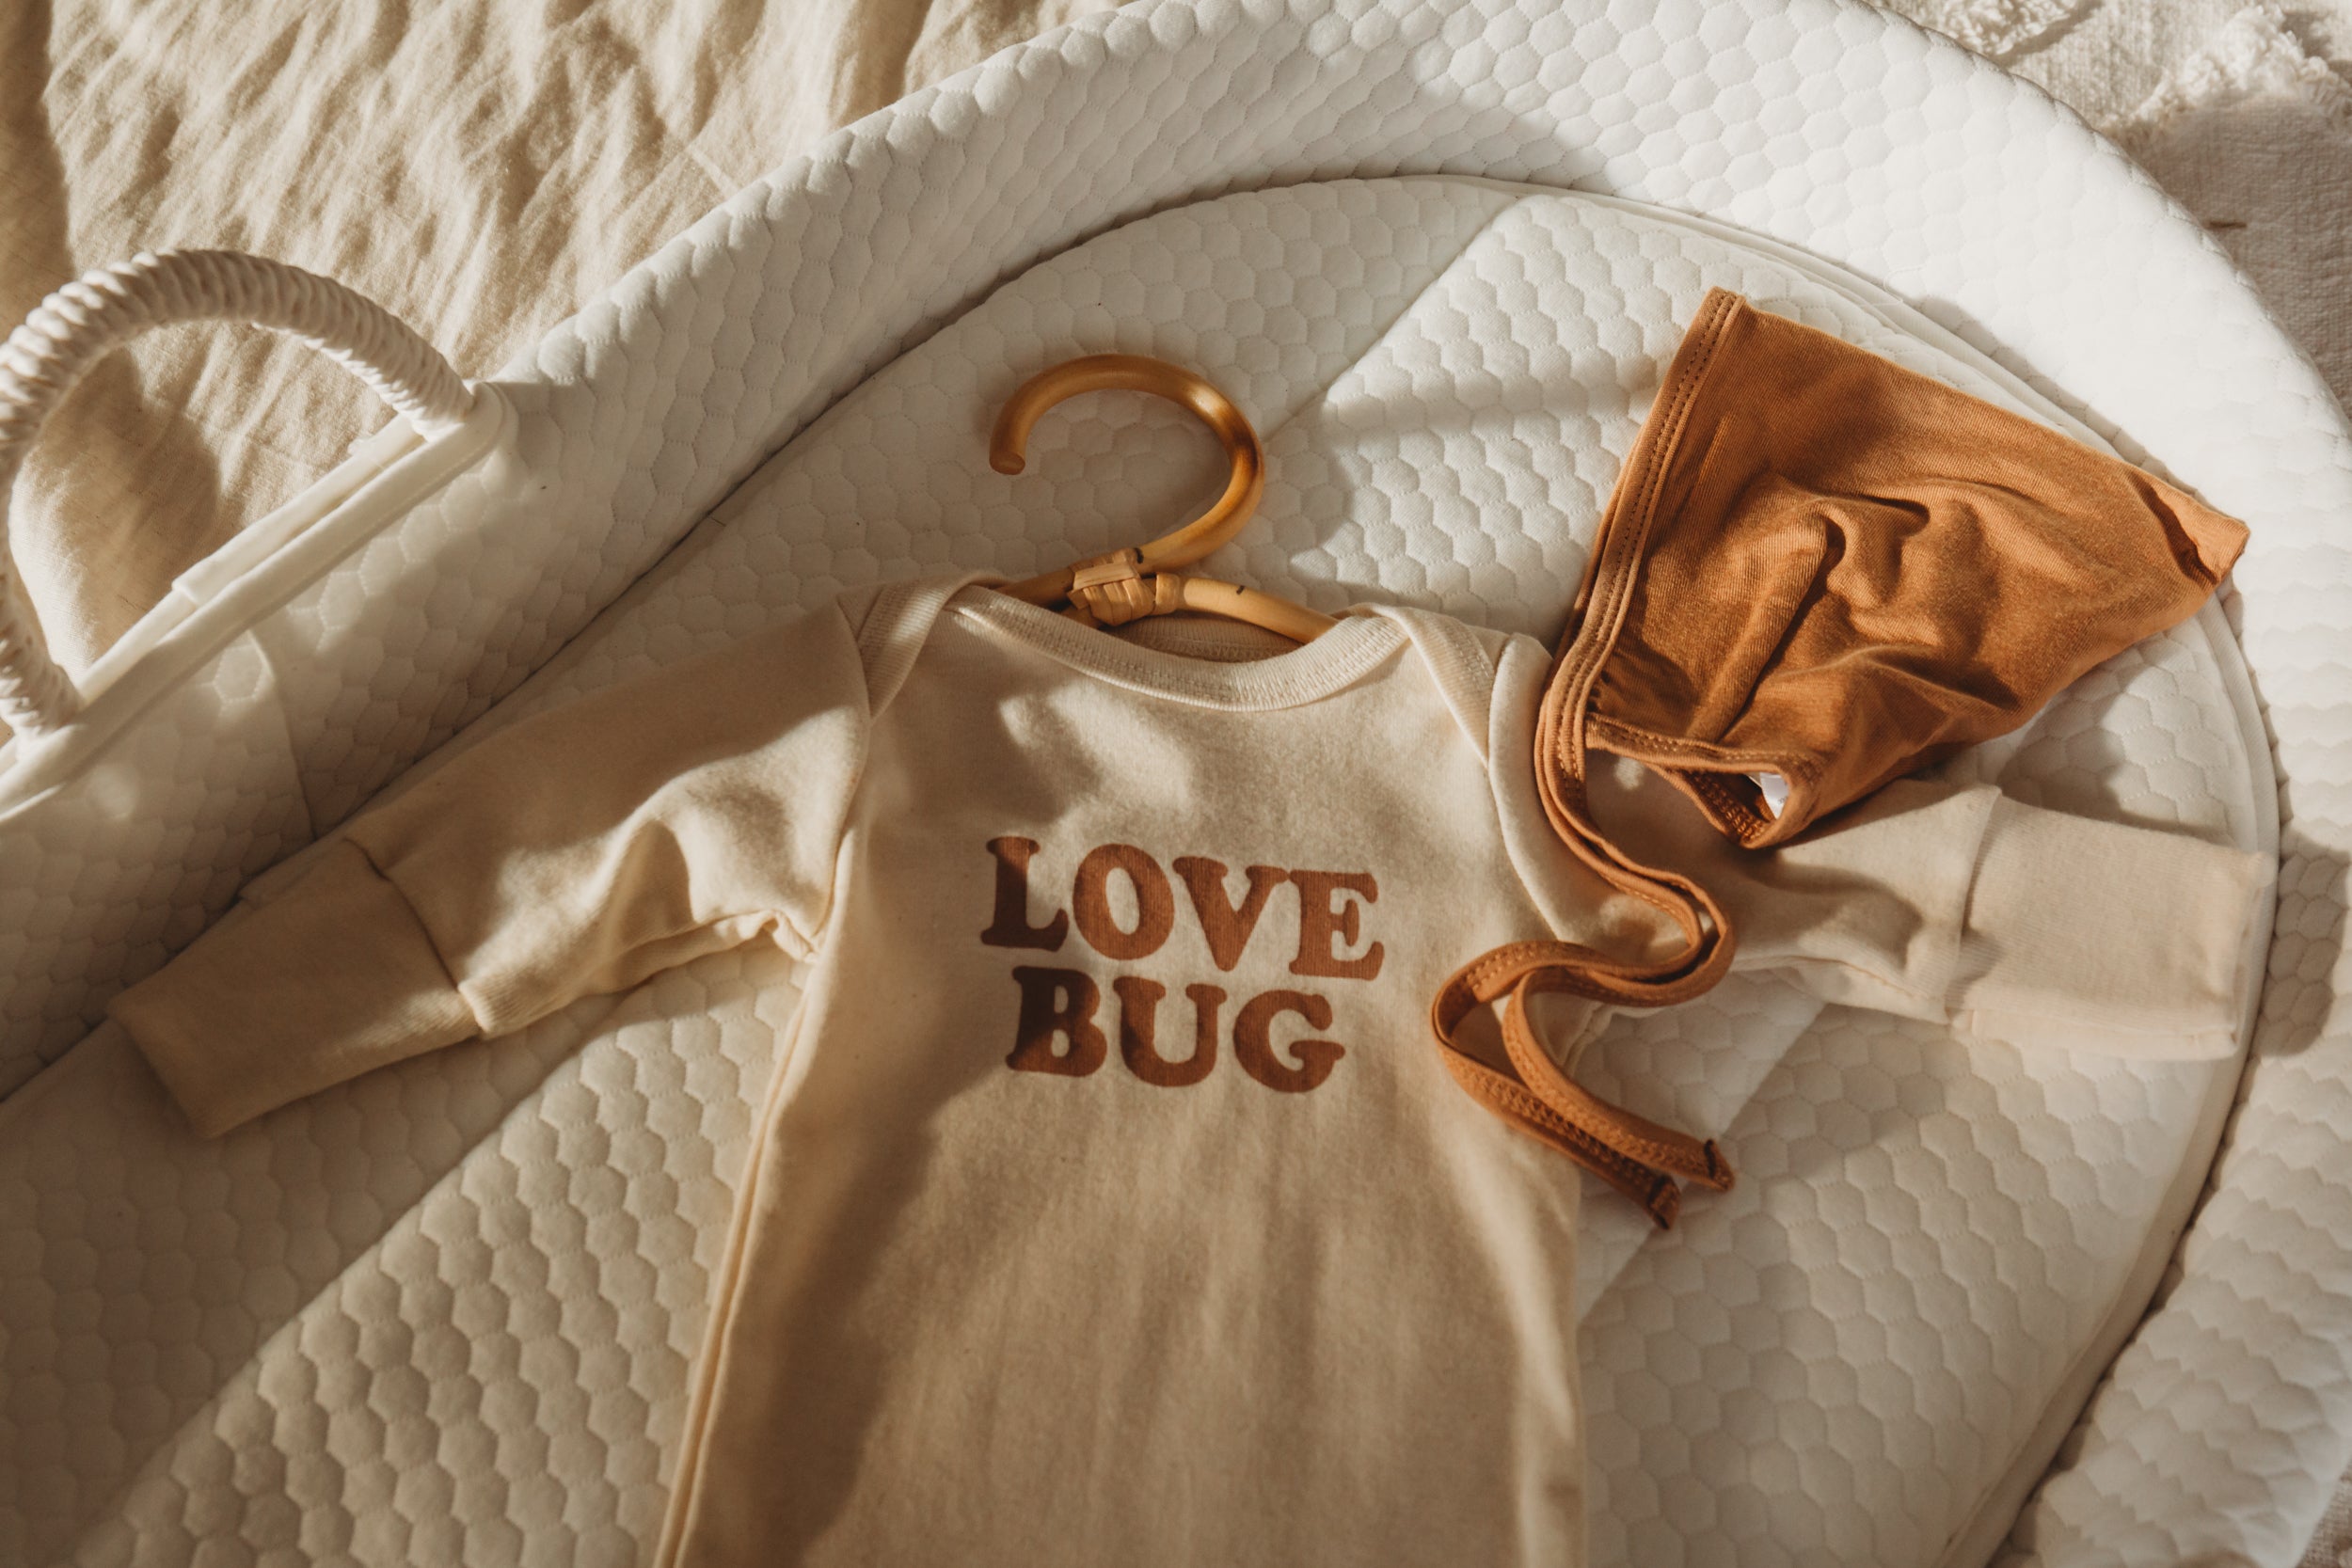 Love Bug - Long Sleeve Infant Tie Gown